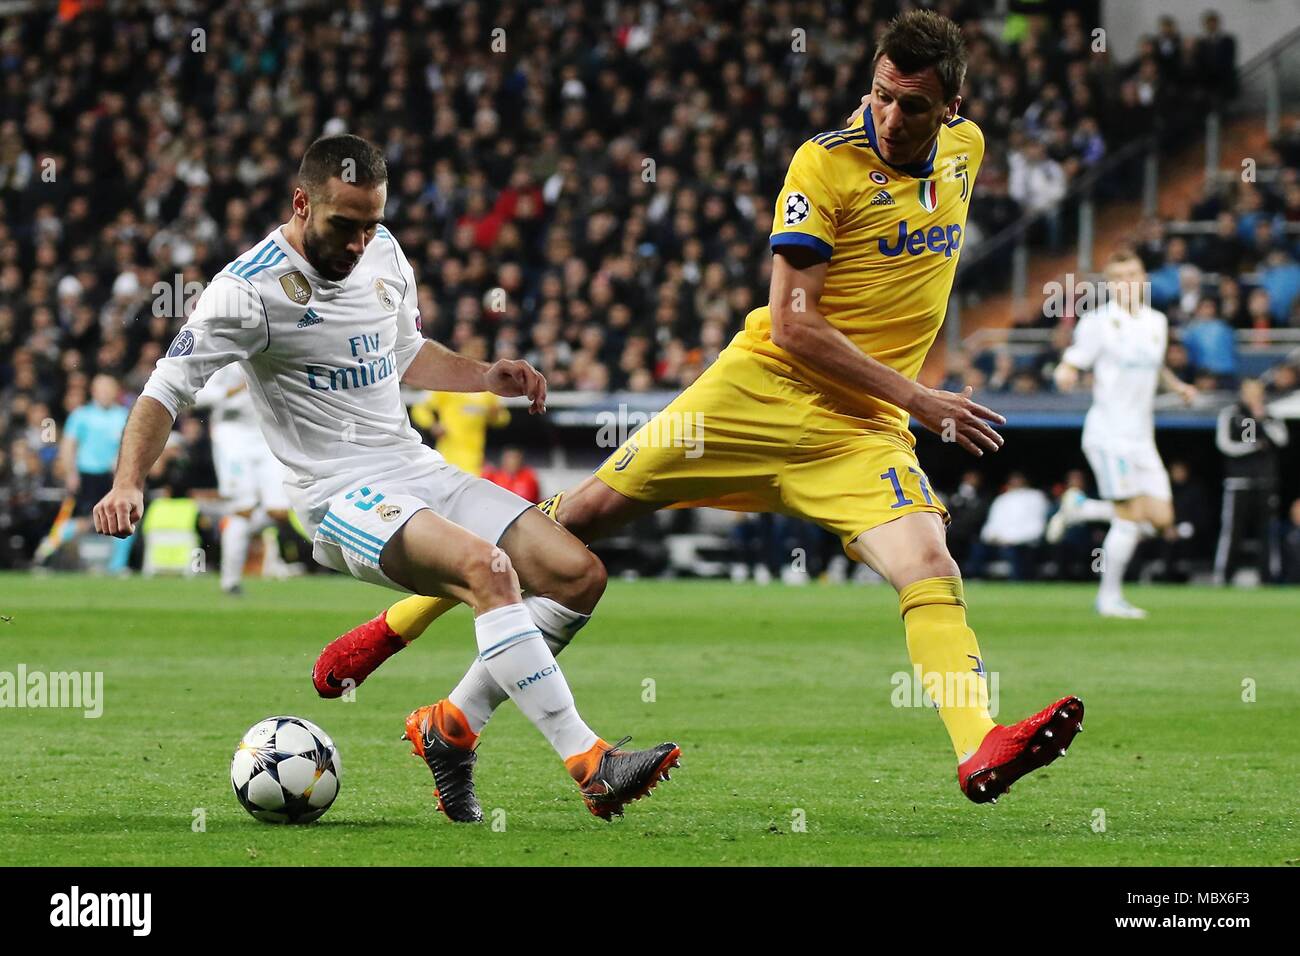 Madrid, Spain. 11th Apr, 2018. Real Madrid's Dani Carvajal (L) vies with Juventus' Mandzukic during the UEFA Champions League quarterfinal second leg soccer match between Spanish team Real Madrid and Italian team Juventus in Madrid, Spain, on April 11, 2018. Juventus won 3-1. Real Madrid advanced to the semifinal with 4-3 on aggregate. Credit: Edward Peters Lopez/Xinhua/Alamy Live News Stock Photo